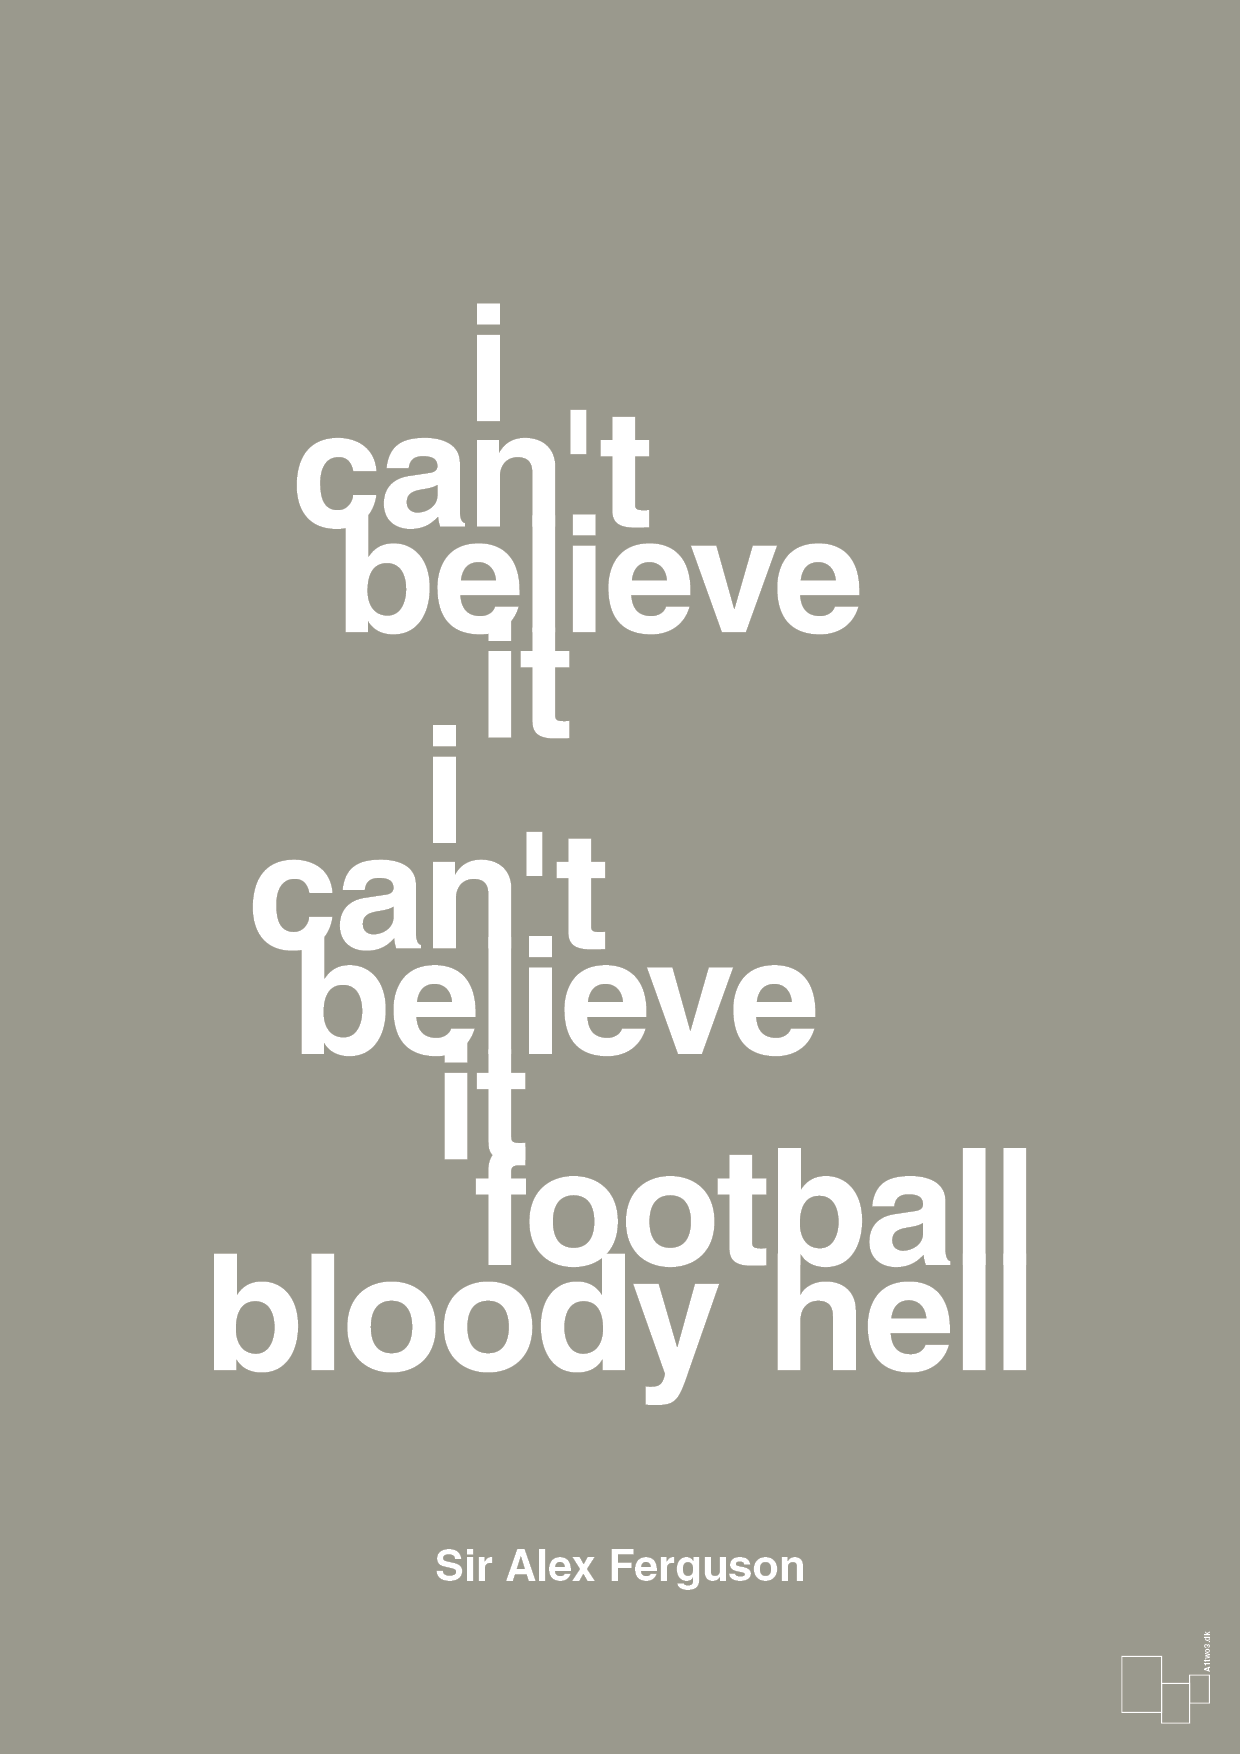 i can't believe it i can't believe it football bloody hell - Plakat med Citater i Battleship Gray